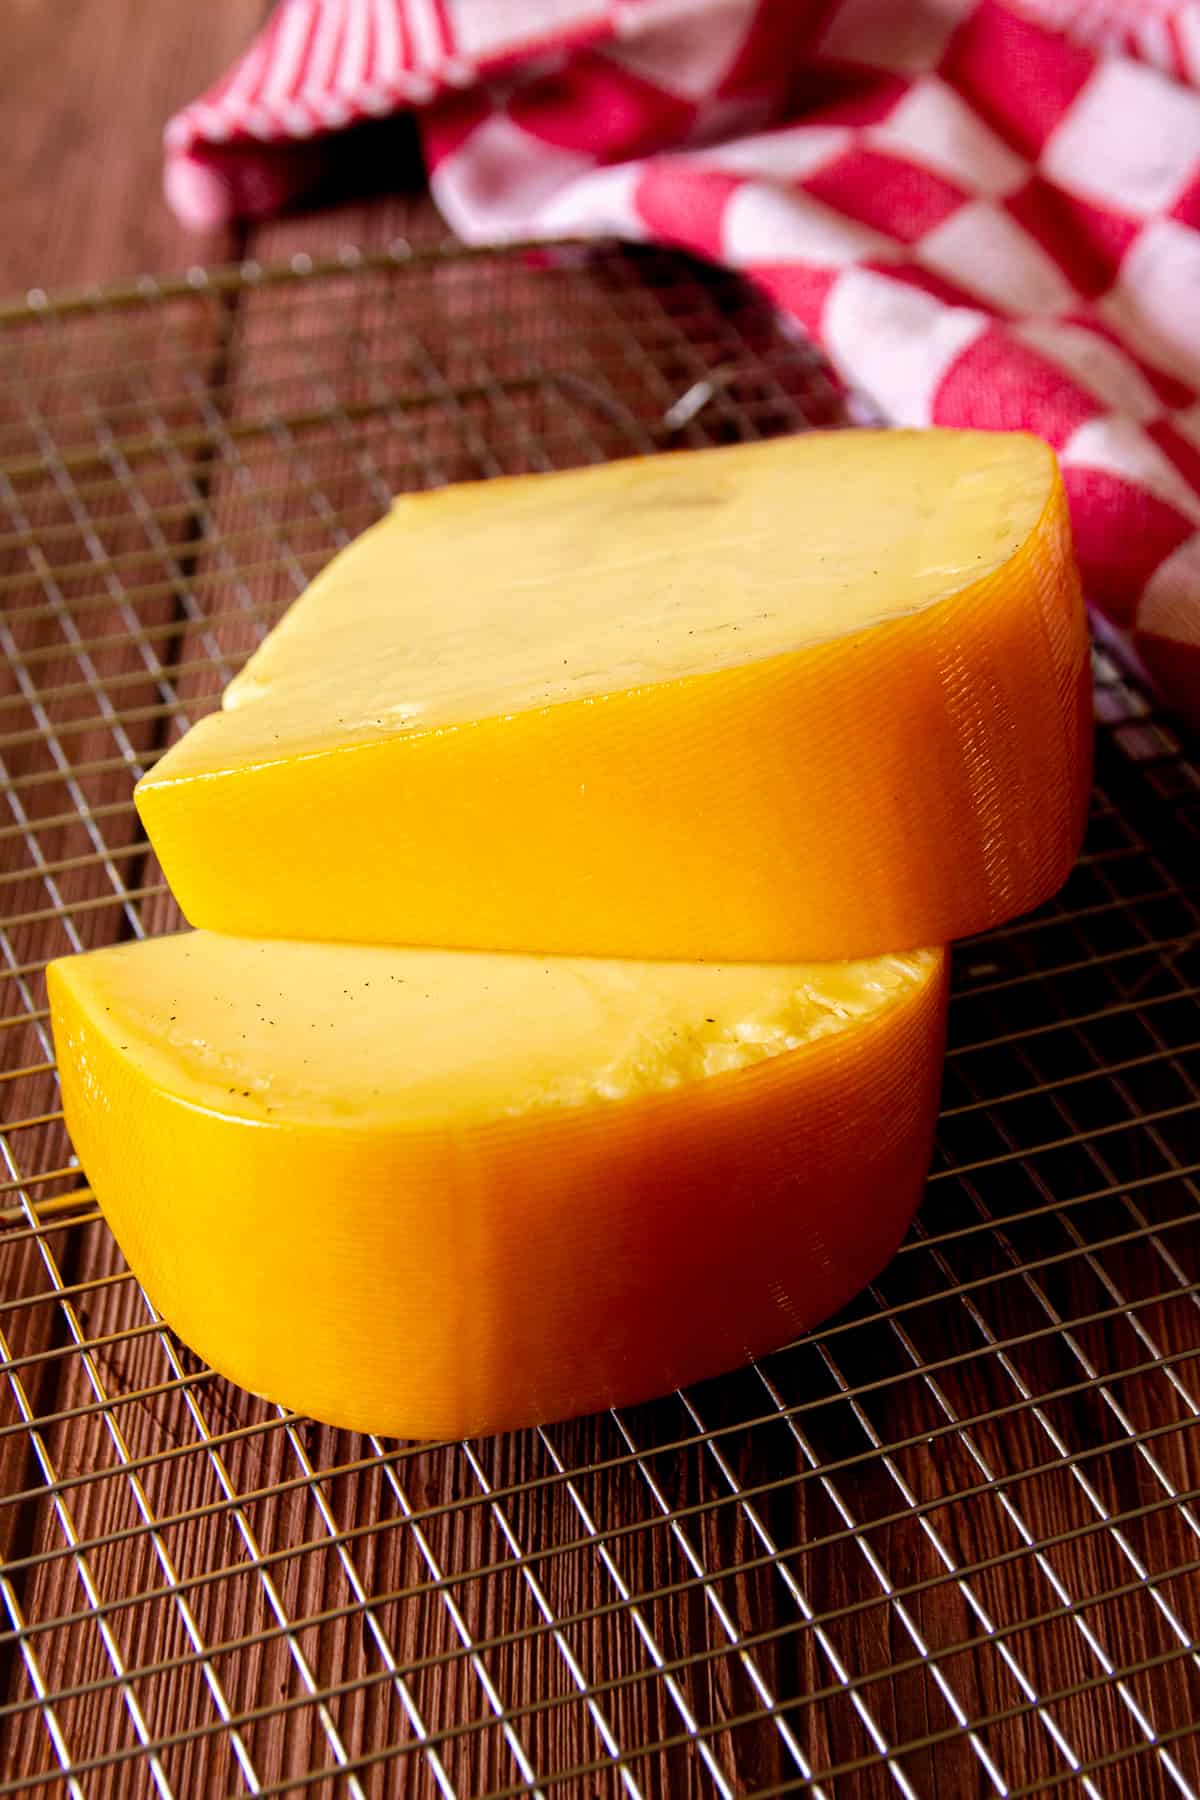 Two large pieces of smoked gouda on a wire rack with a red towel in the background.